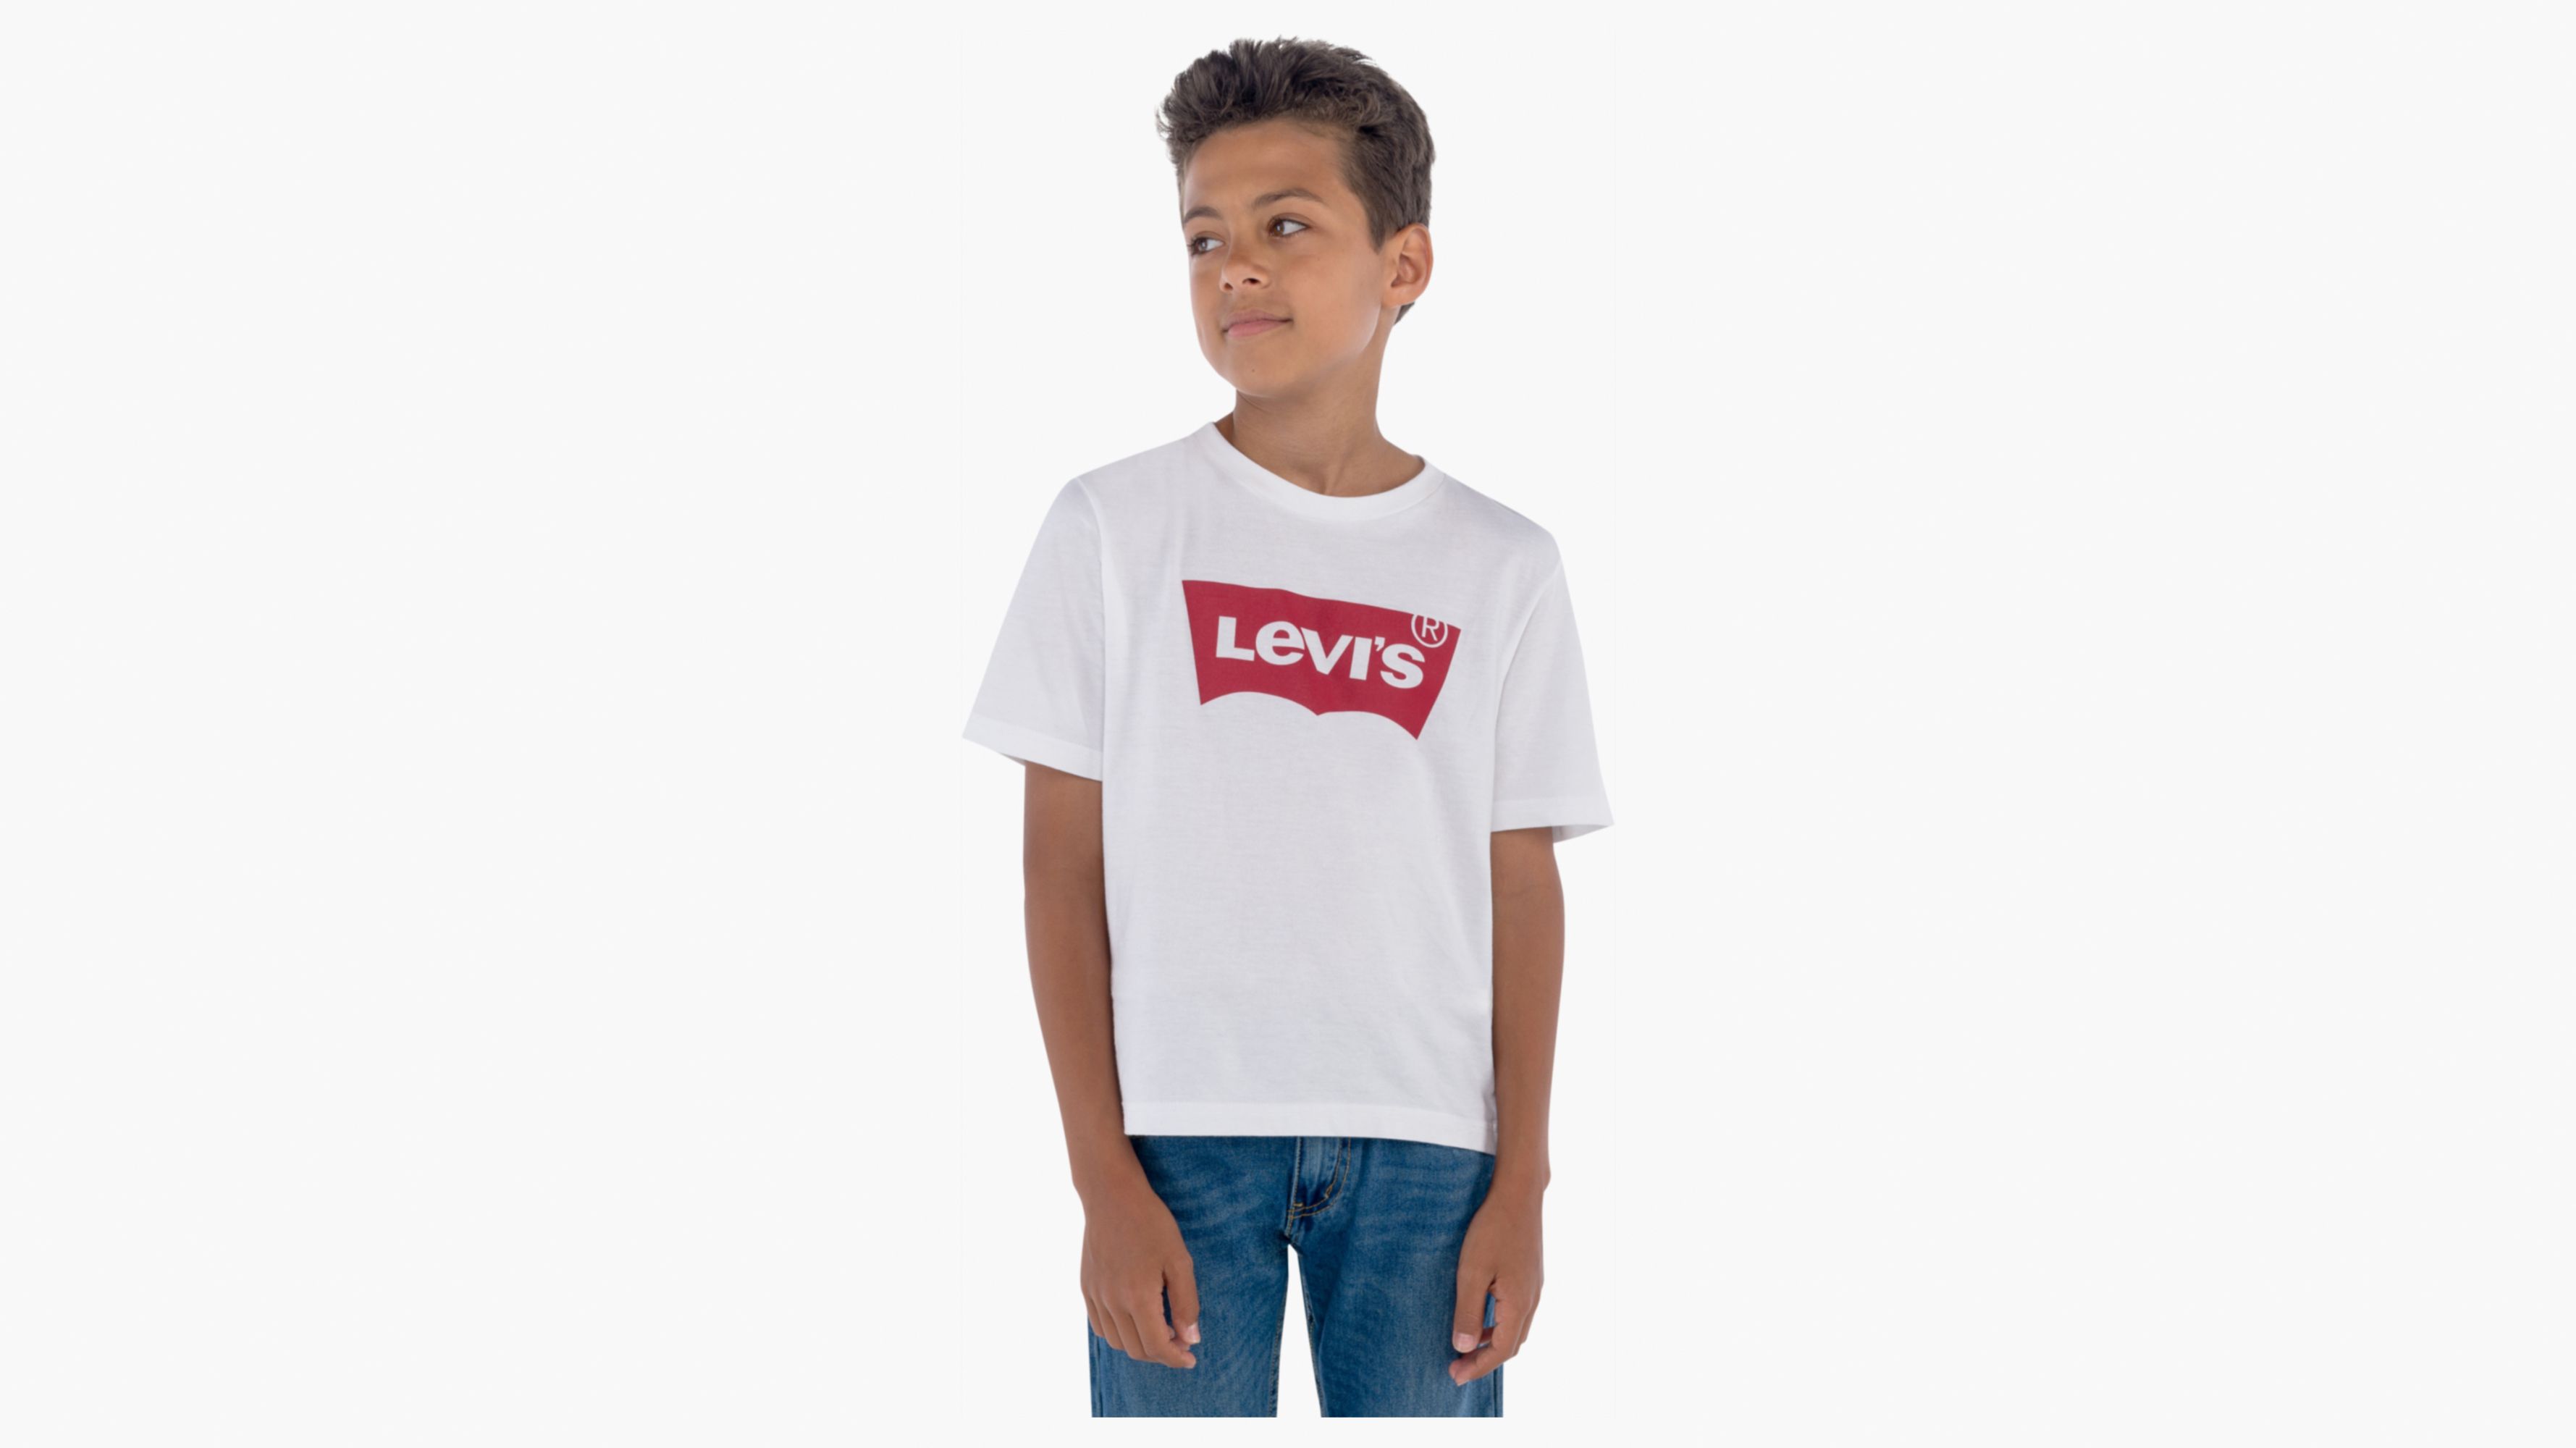 levis shirts for kids